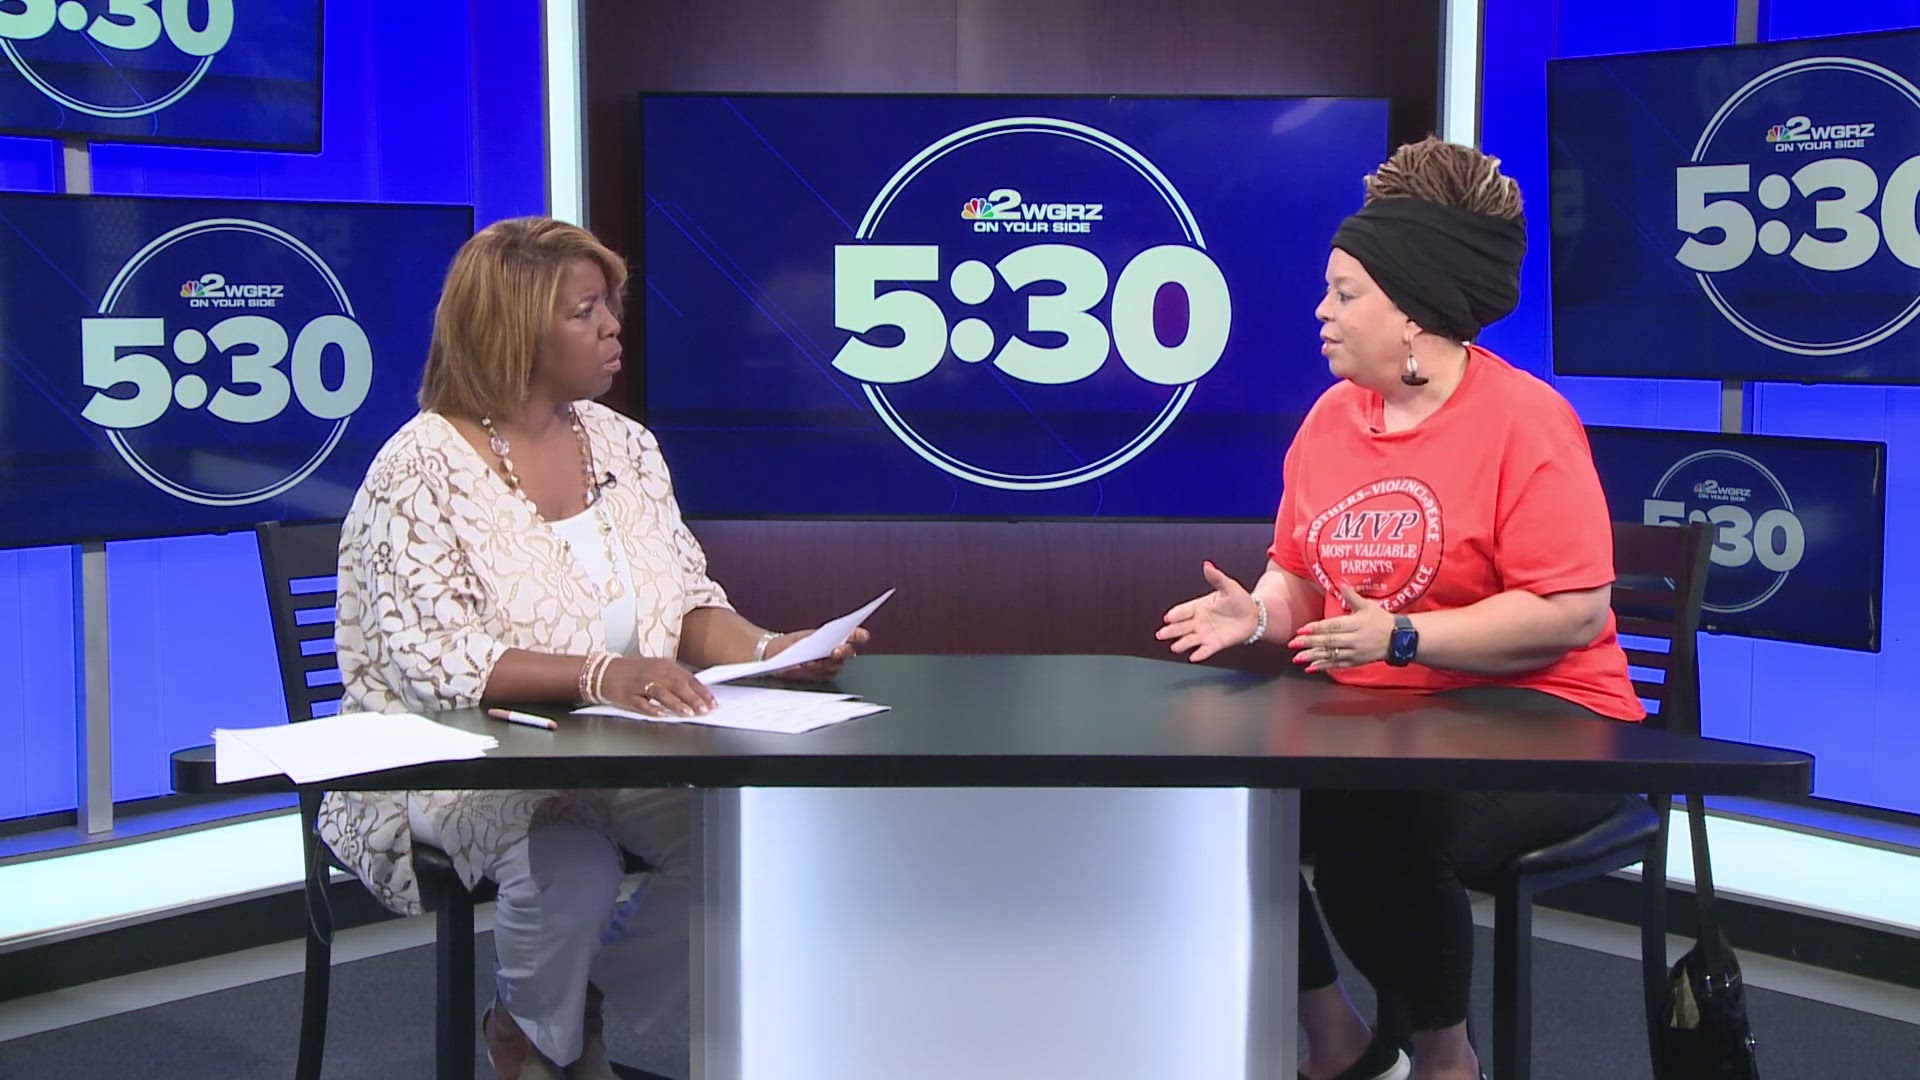 Most Valuable Parents executive director Mia Ayers-Goss talked with Claudine Ewing about tackling violence among teens.